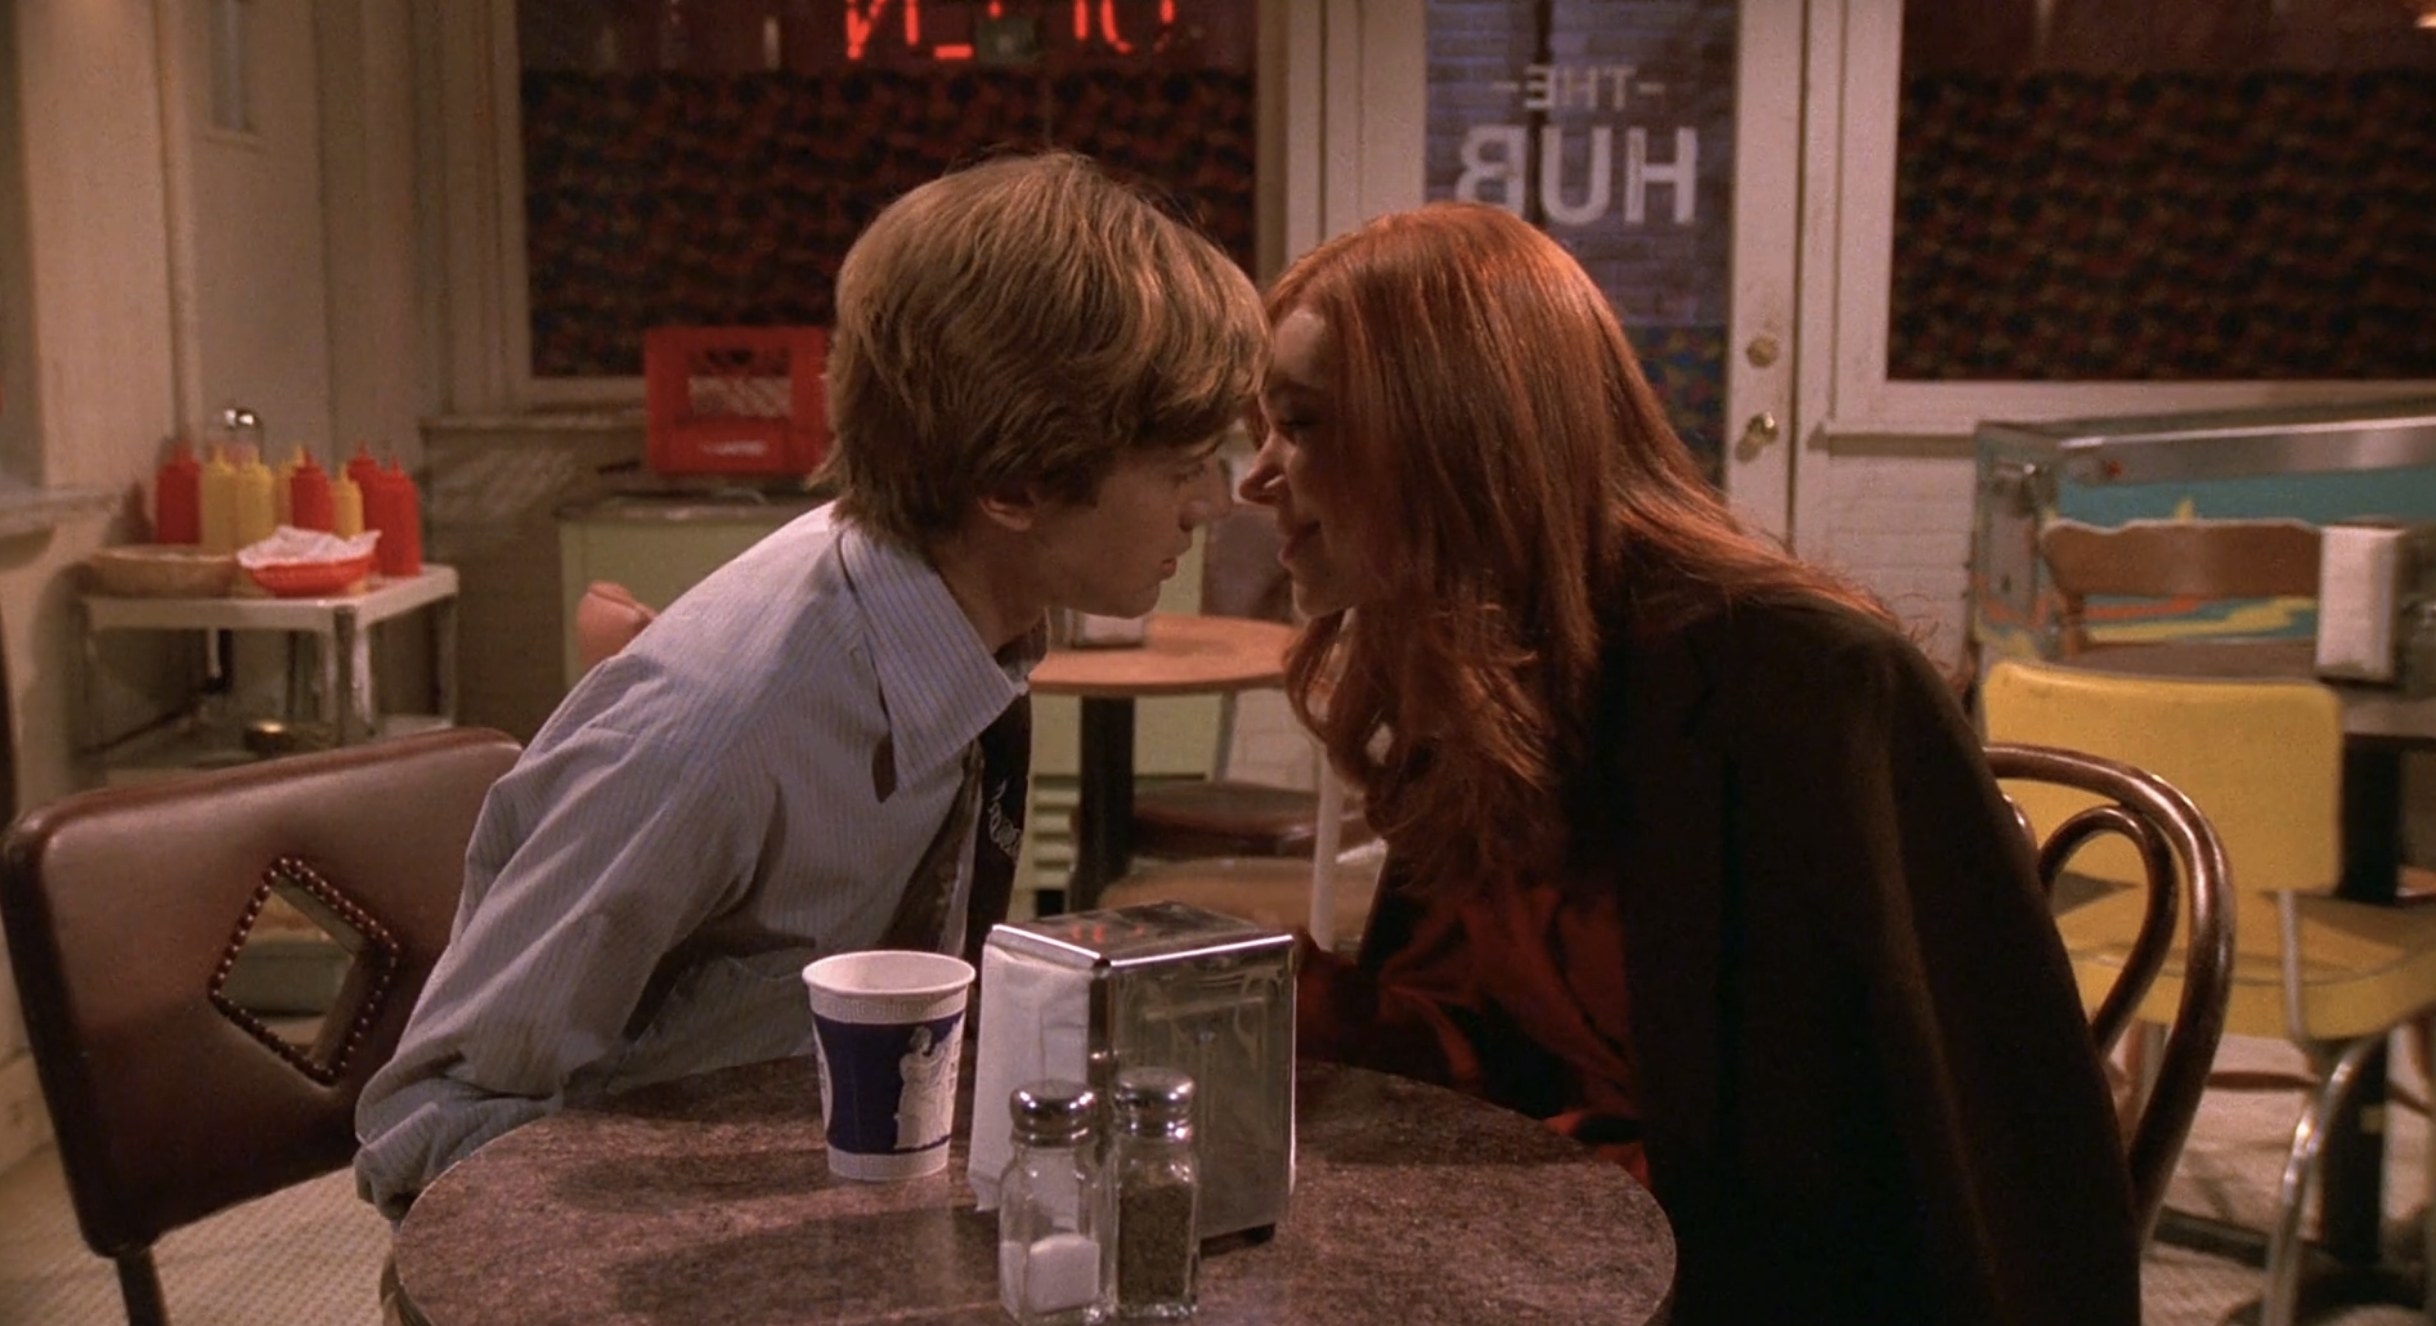 Eric and Donna sit at a table in The Hub and lean in to kiss each other